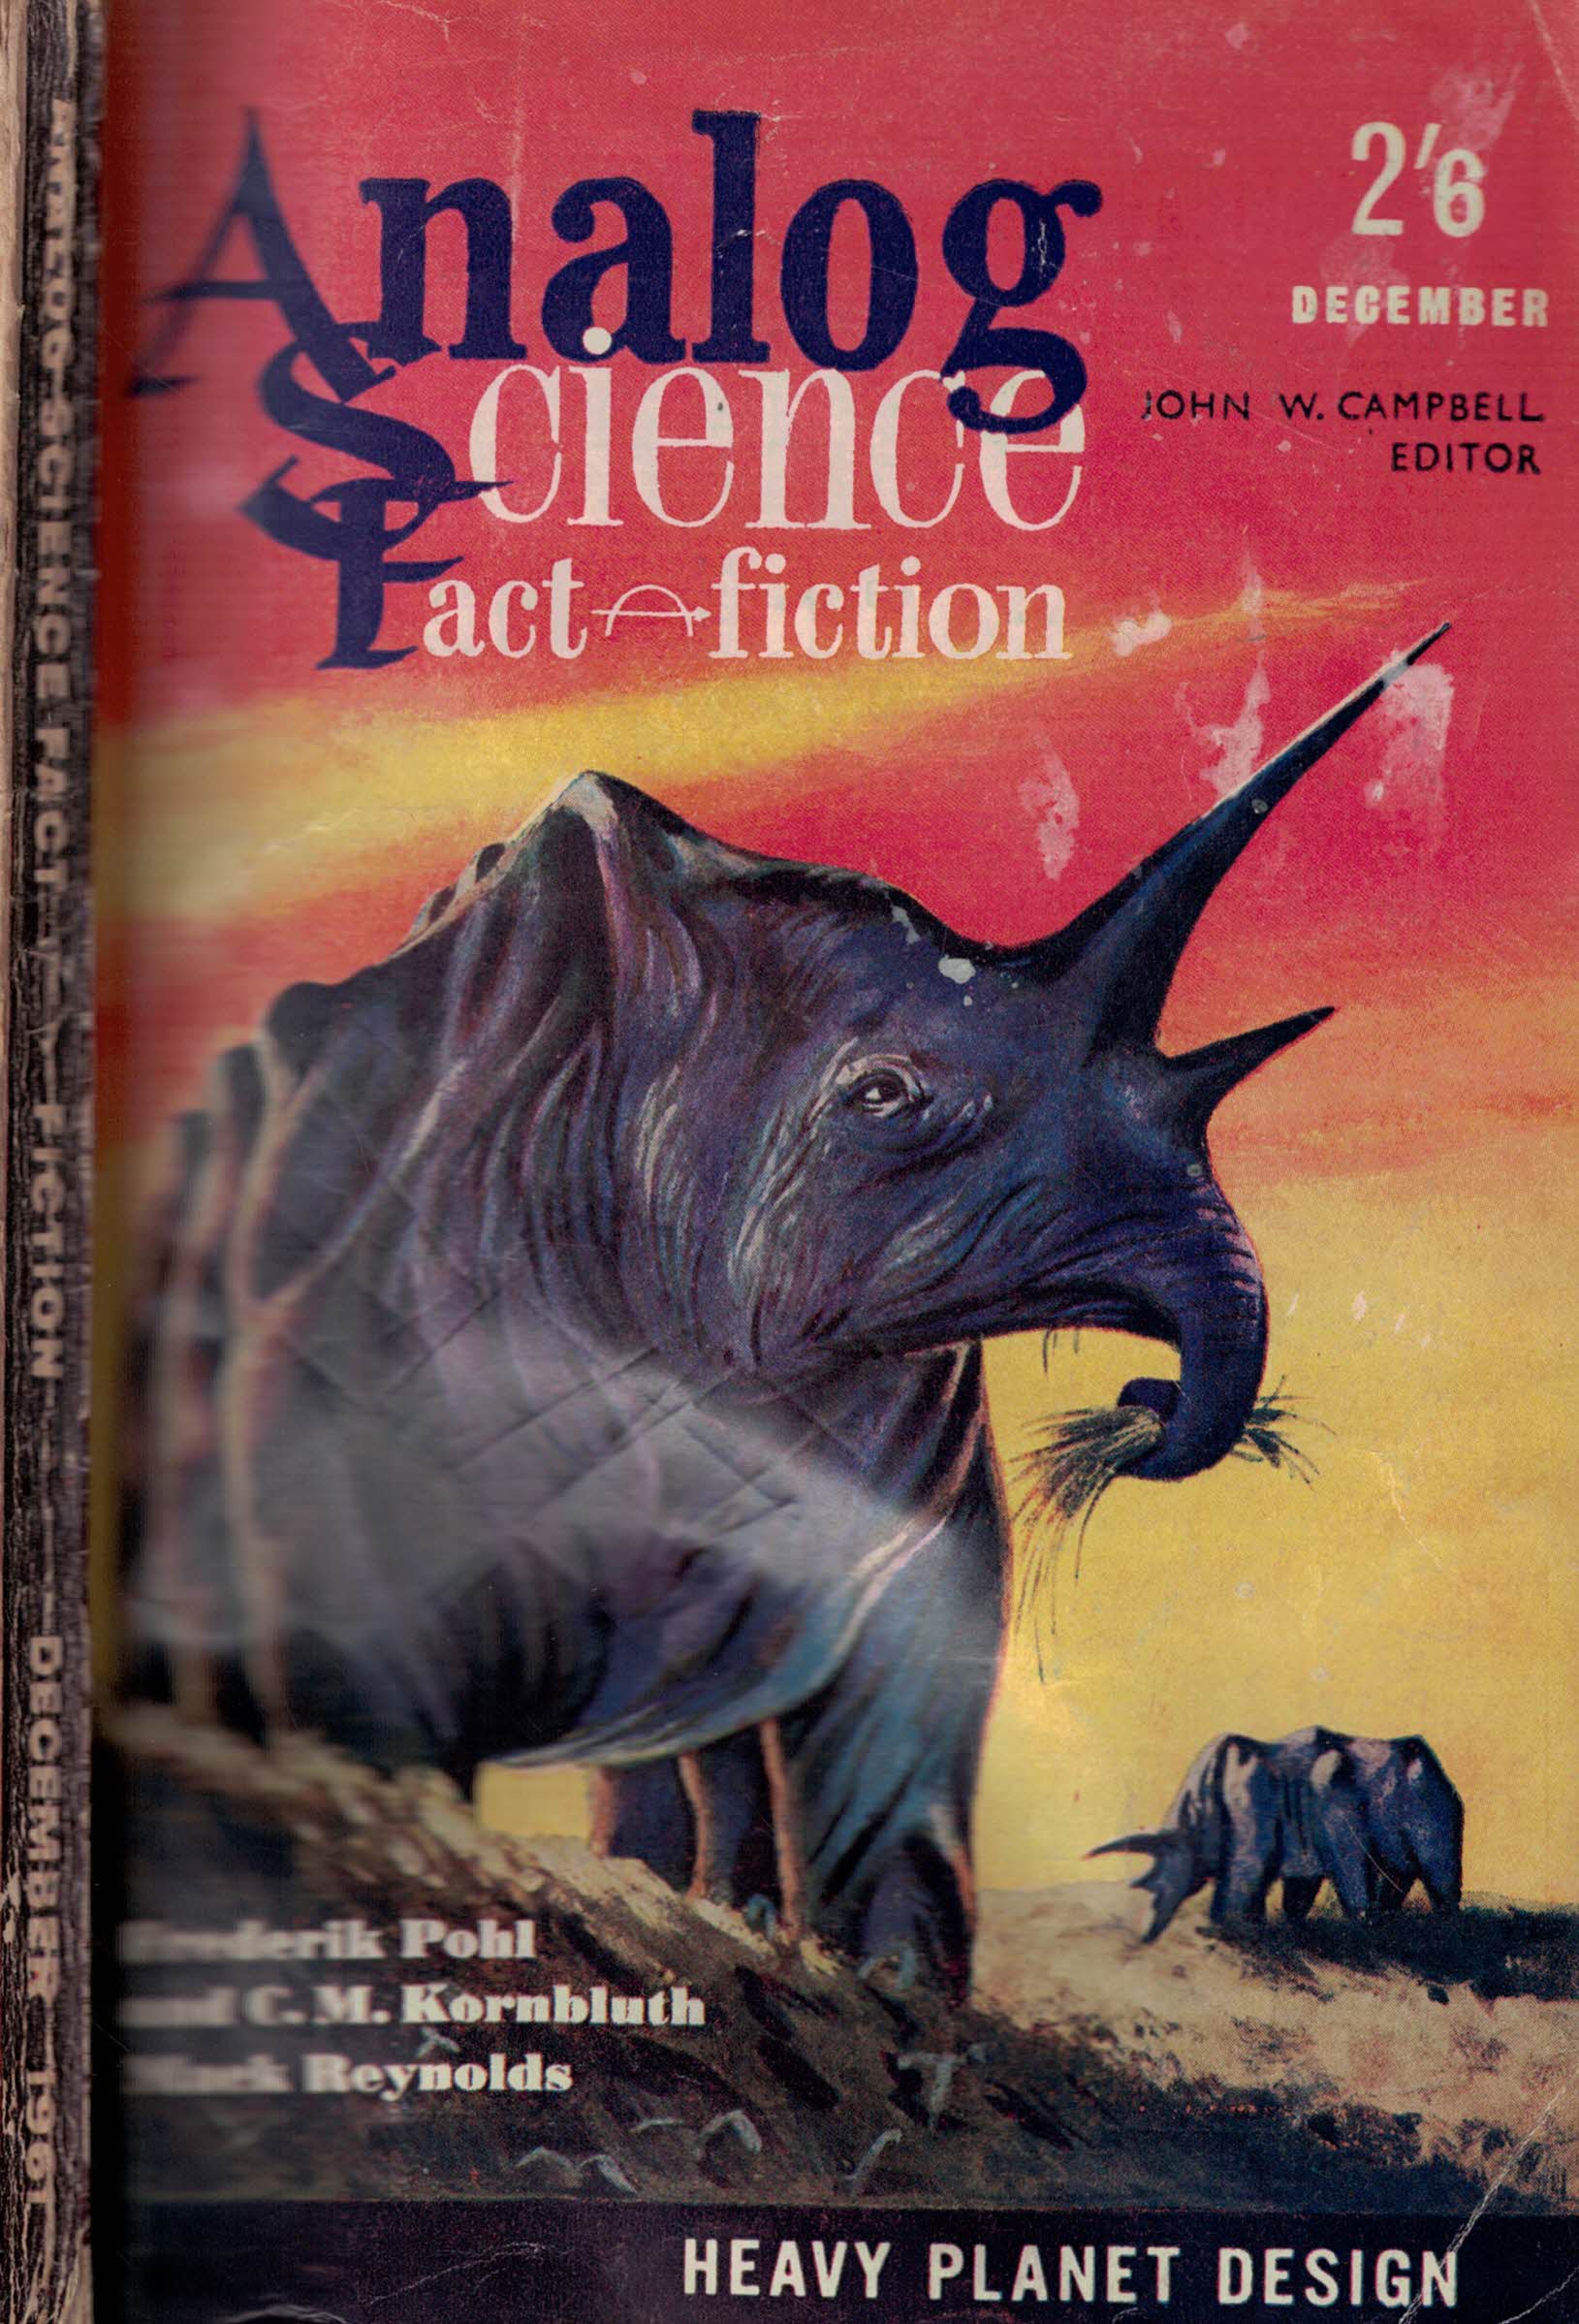 Analog. Science Fiction and Fact. Volume 17, Number 12. December 1961. British edition.